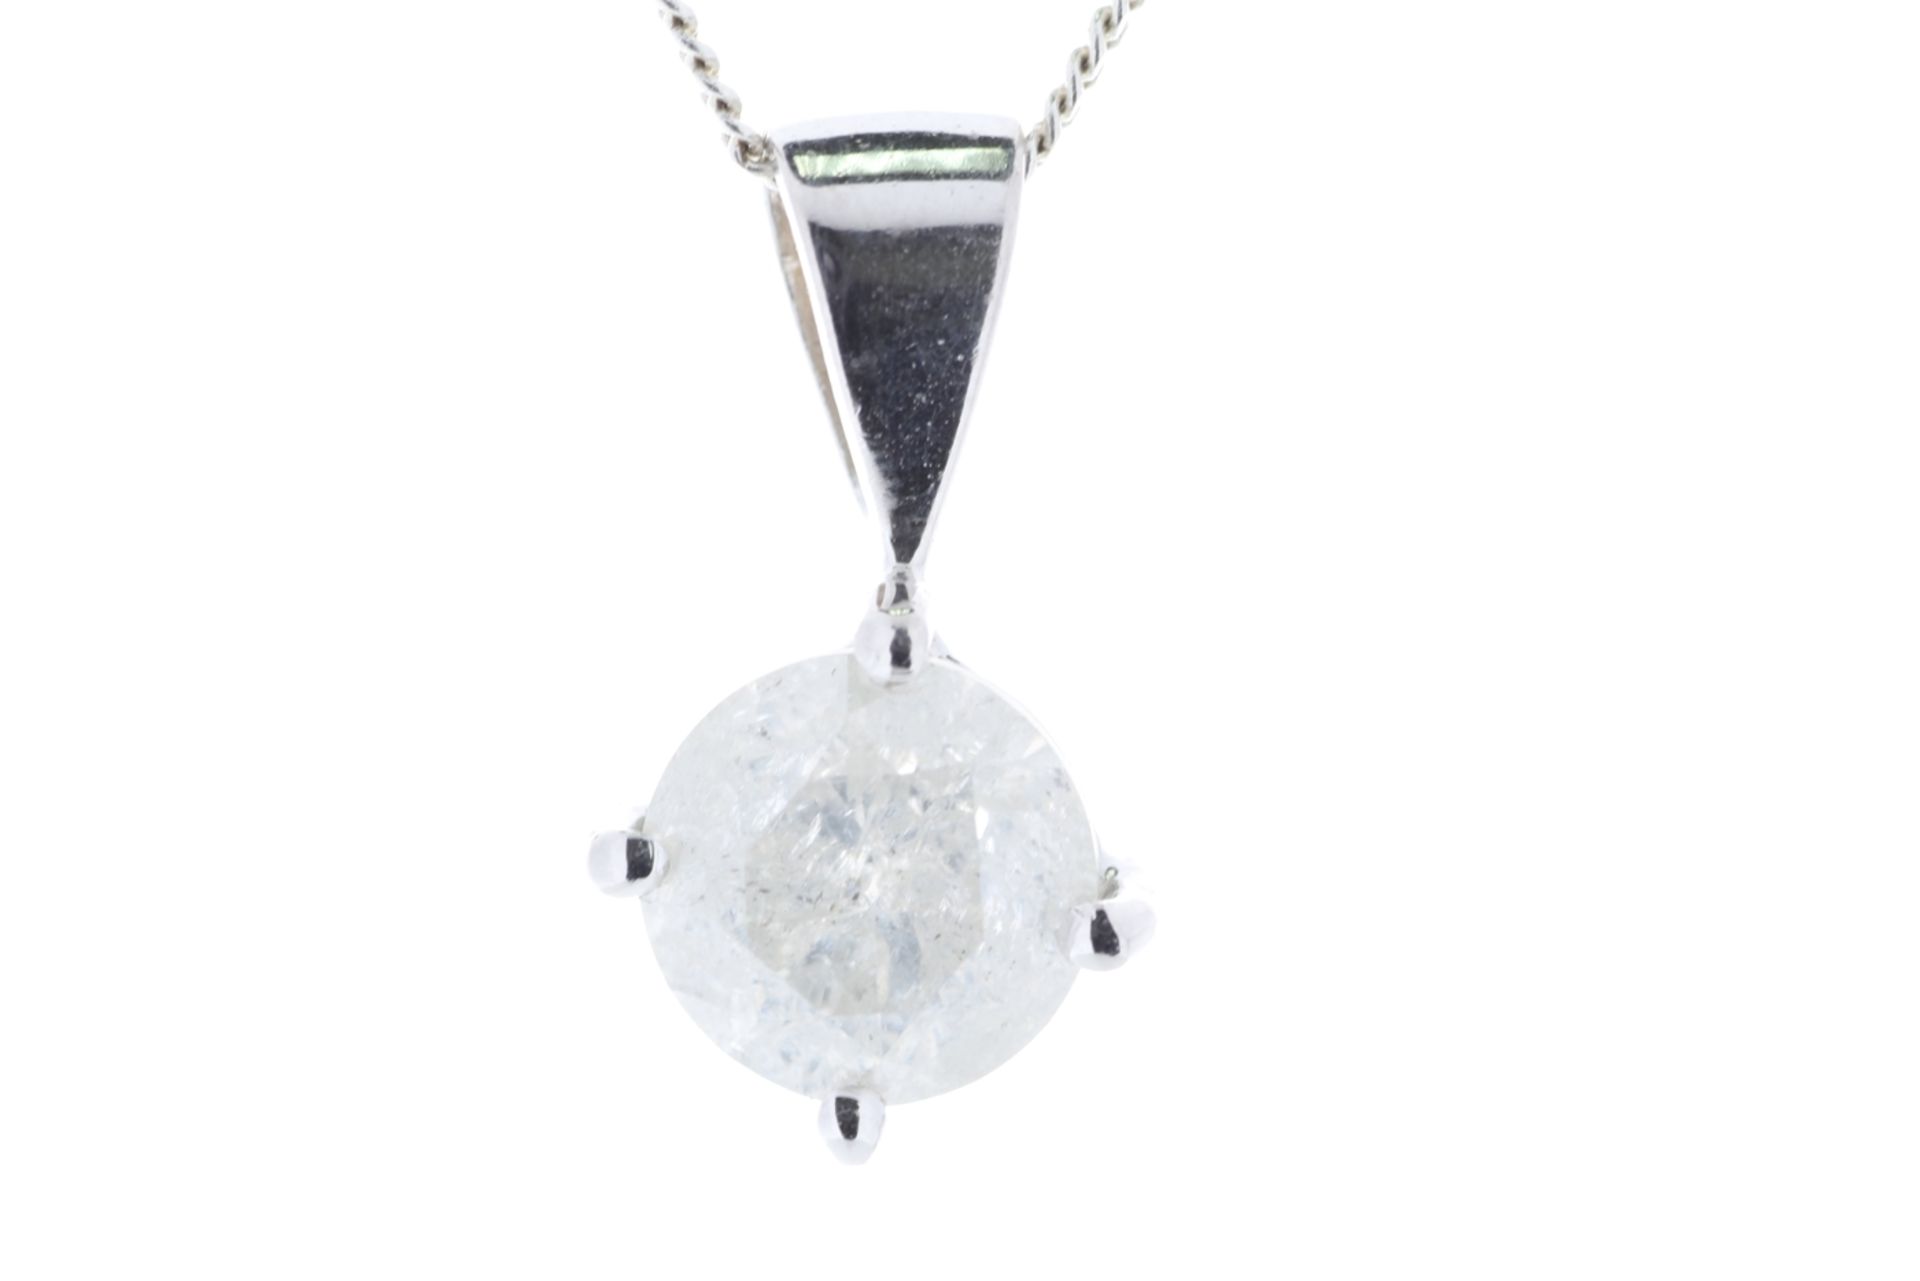 18ct White Gold Prong Set Diamond Pendant 1.42 Carats - Valued By GIE £14,595.00 - One round